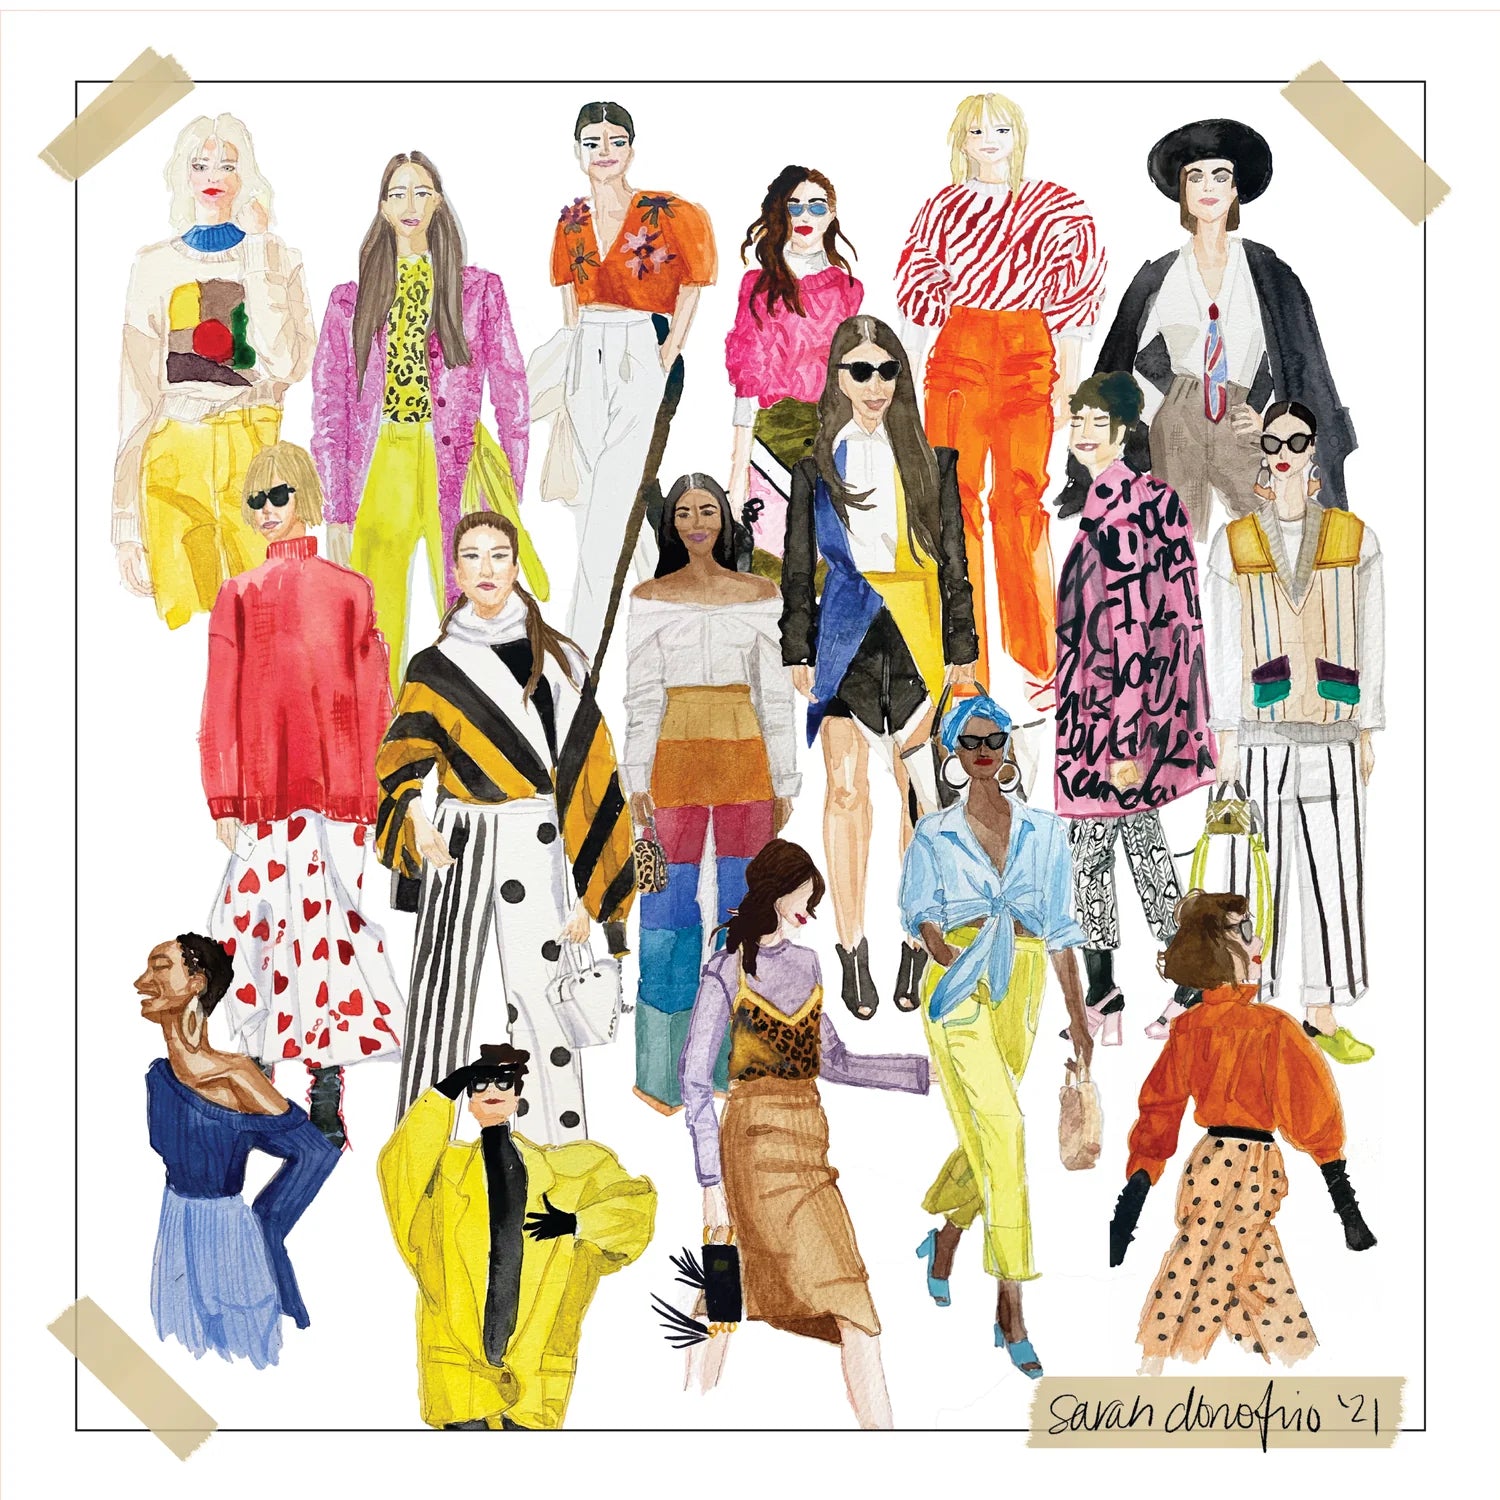 A collage of fashion illustrations in watercolor